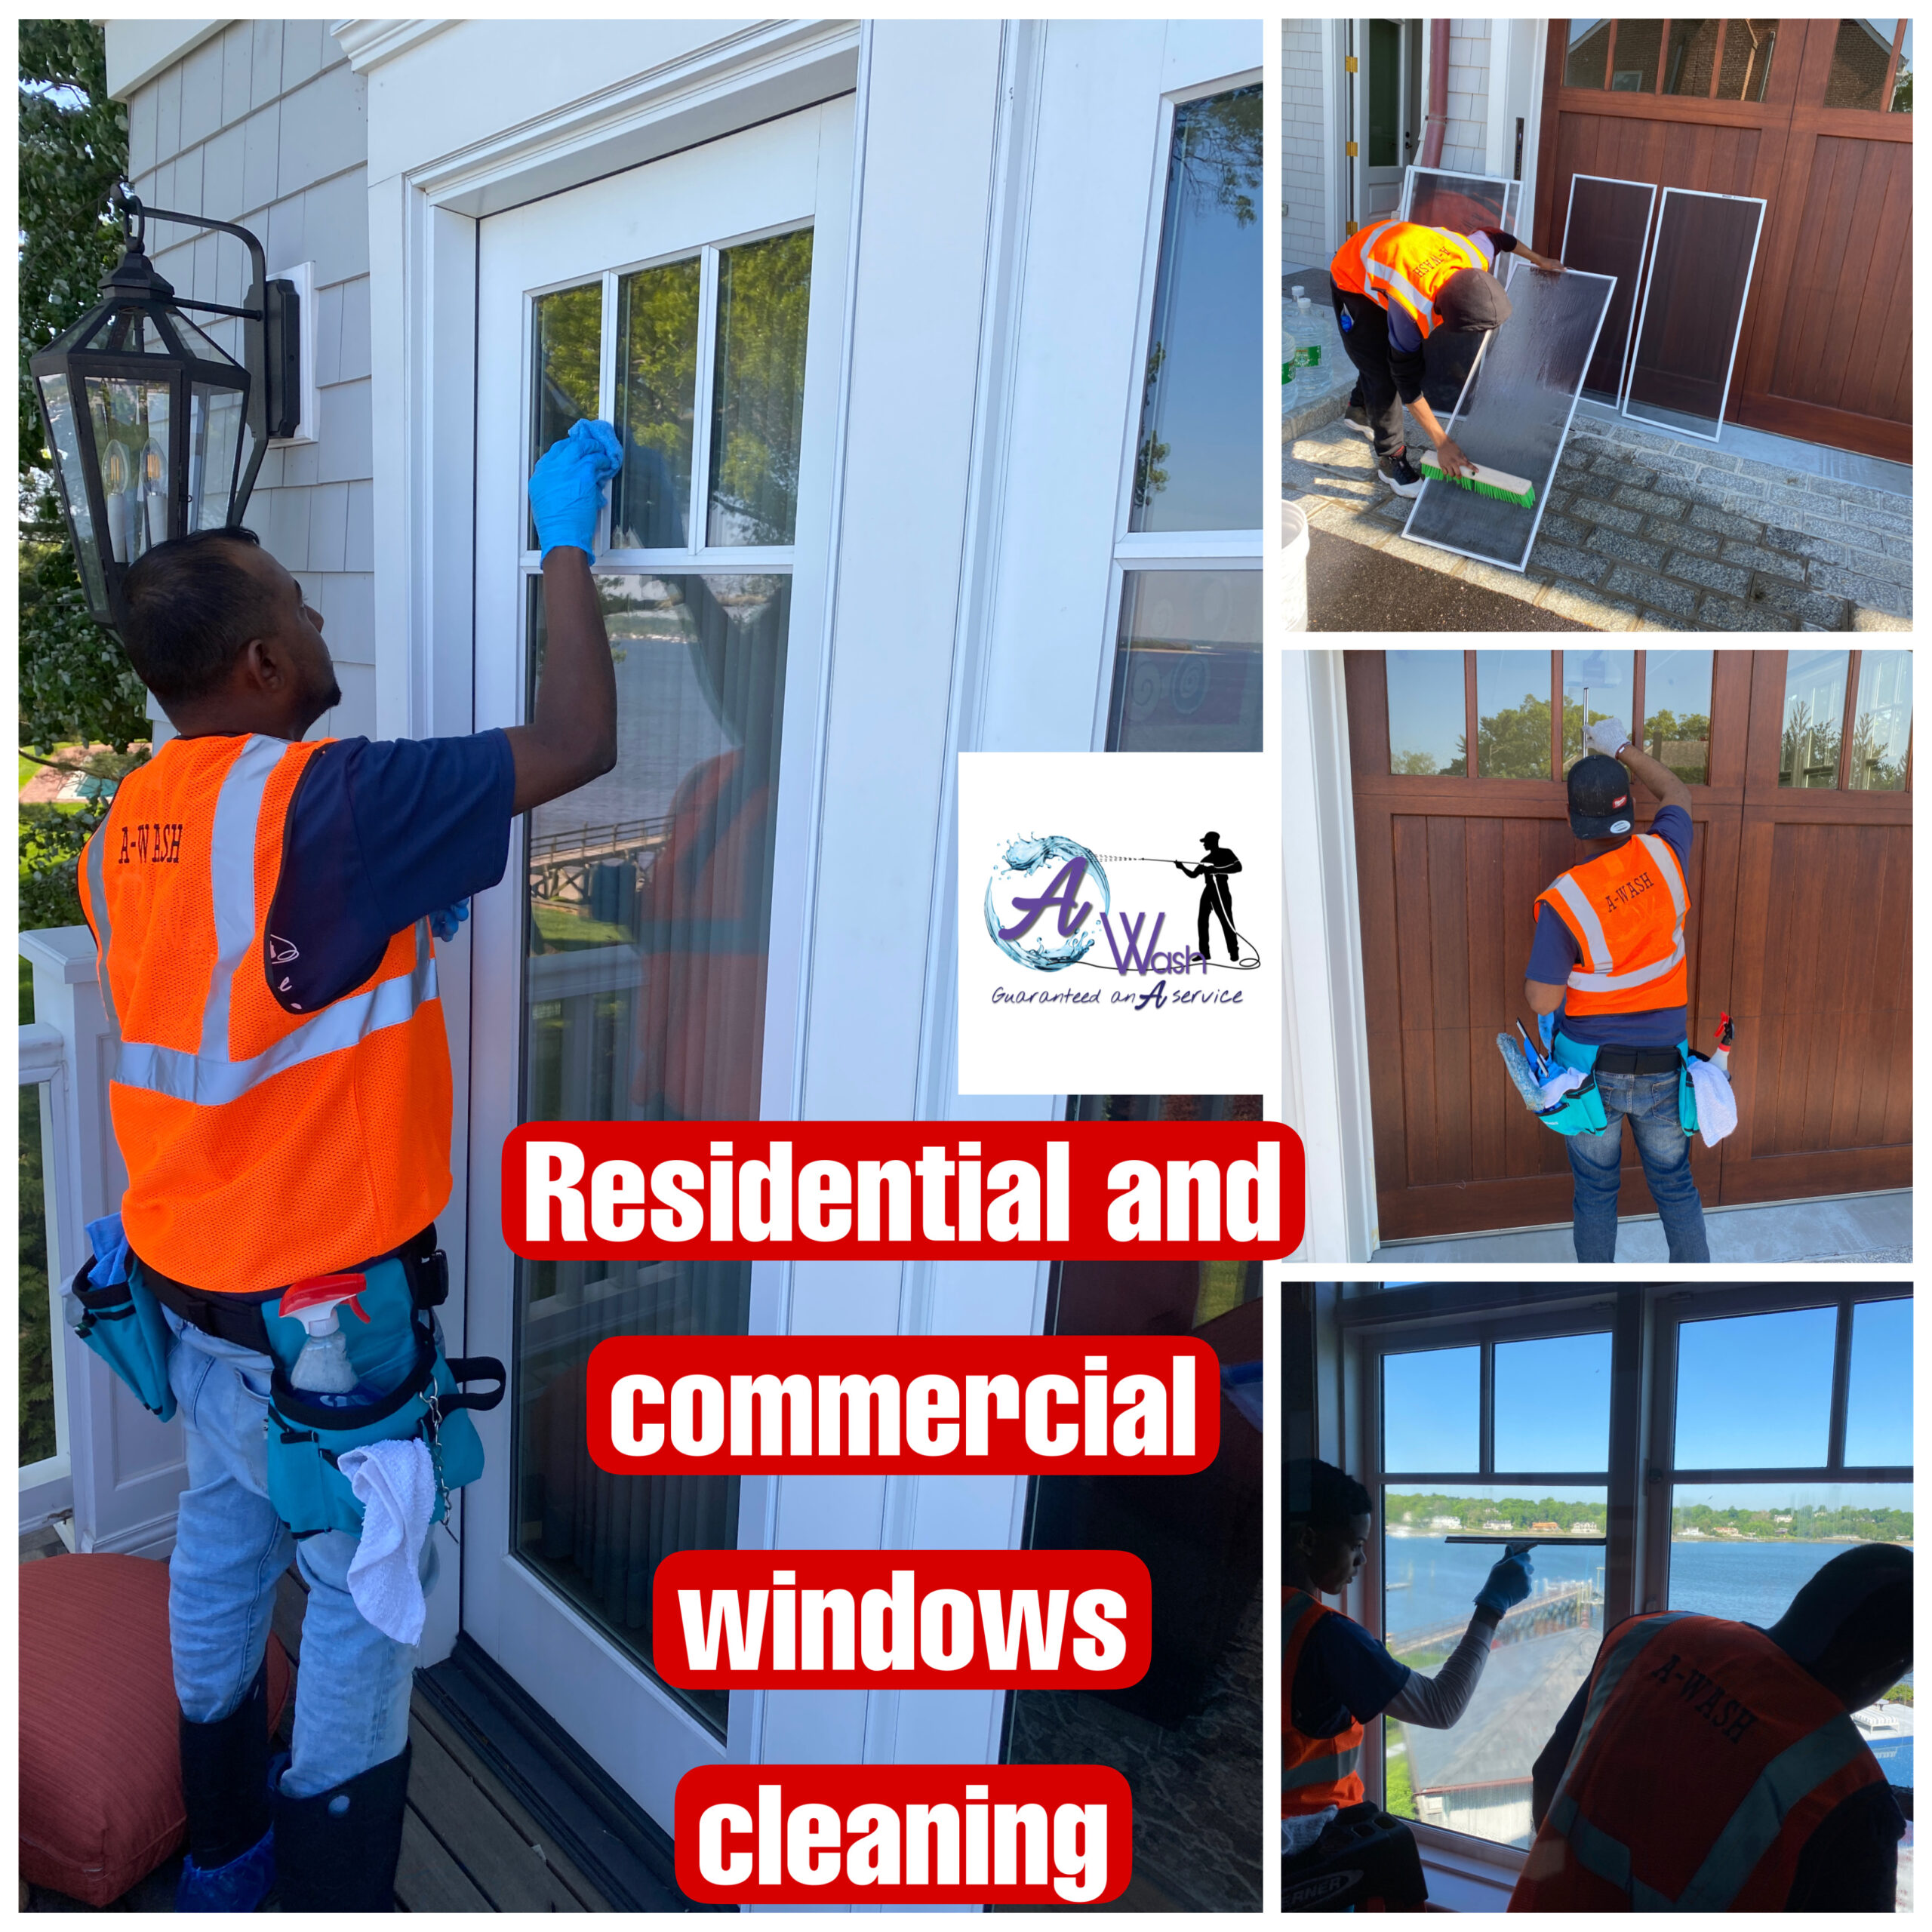 Residential and Commercial Windows Cleaning